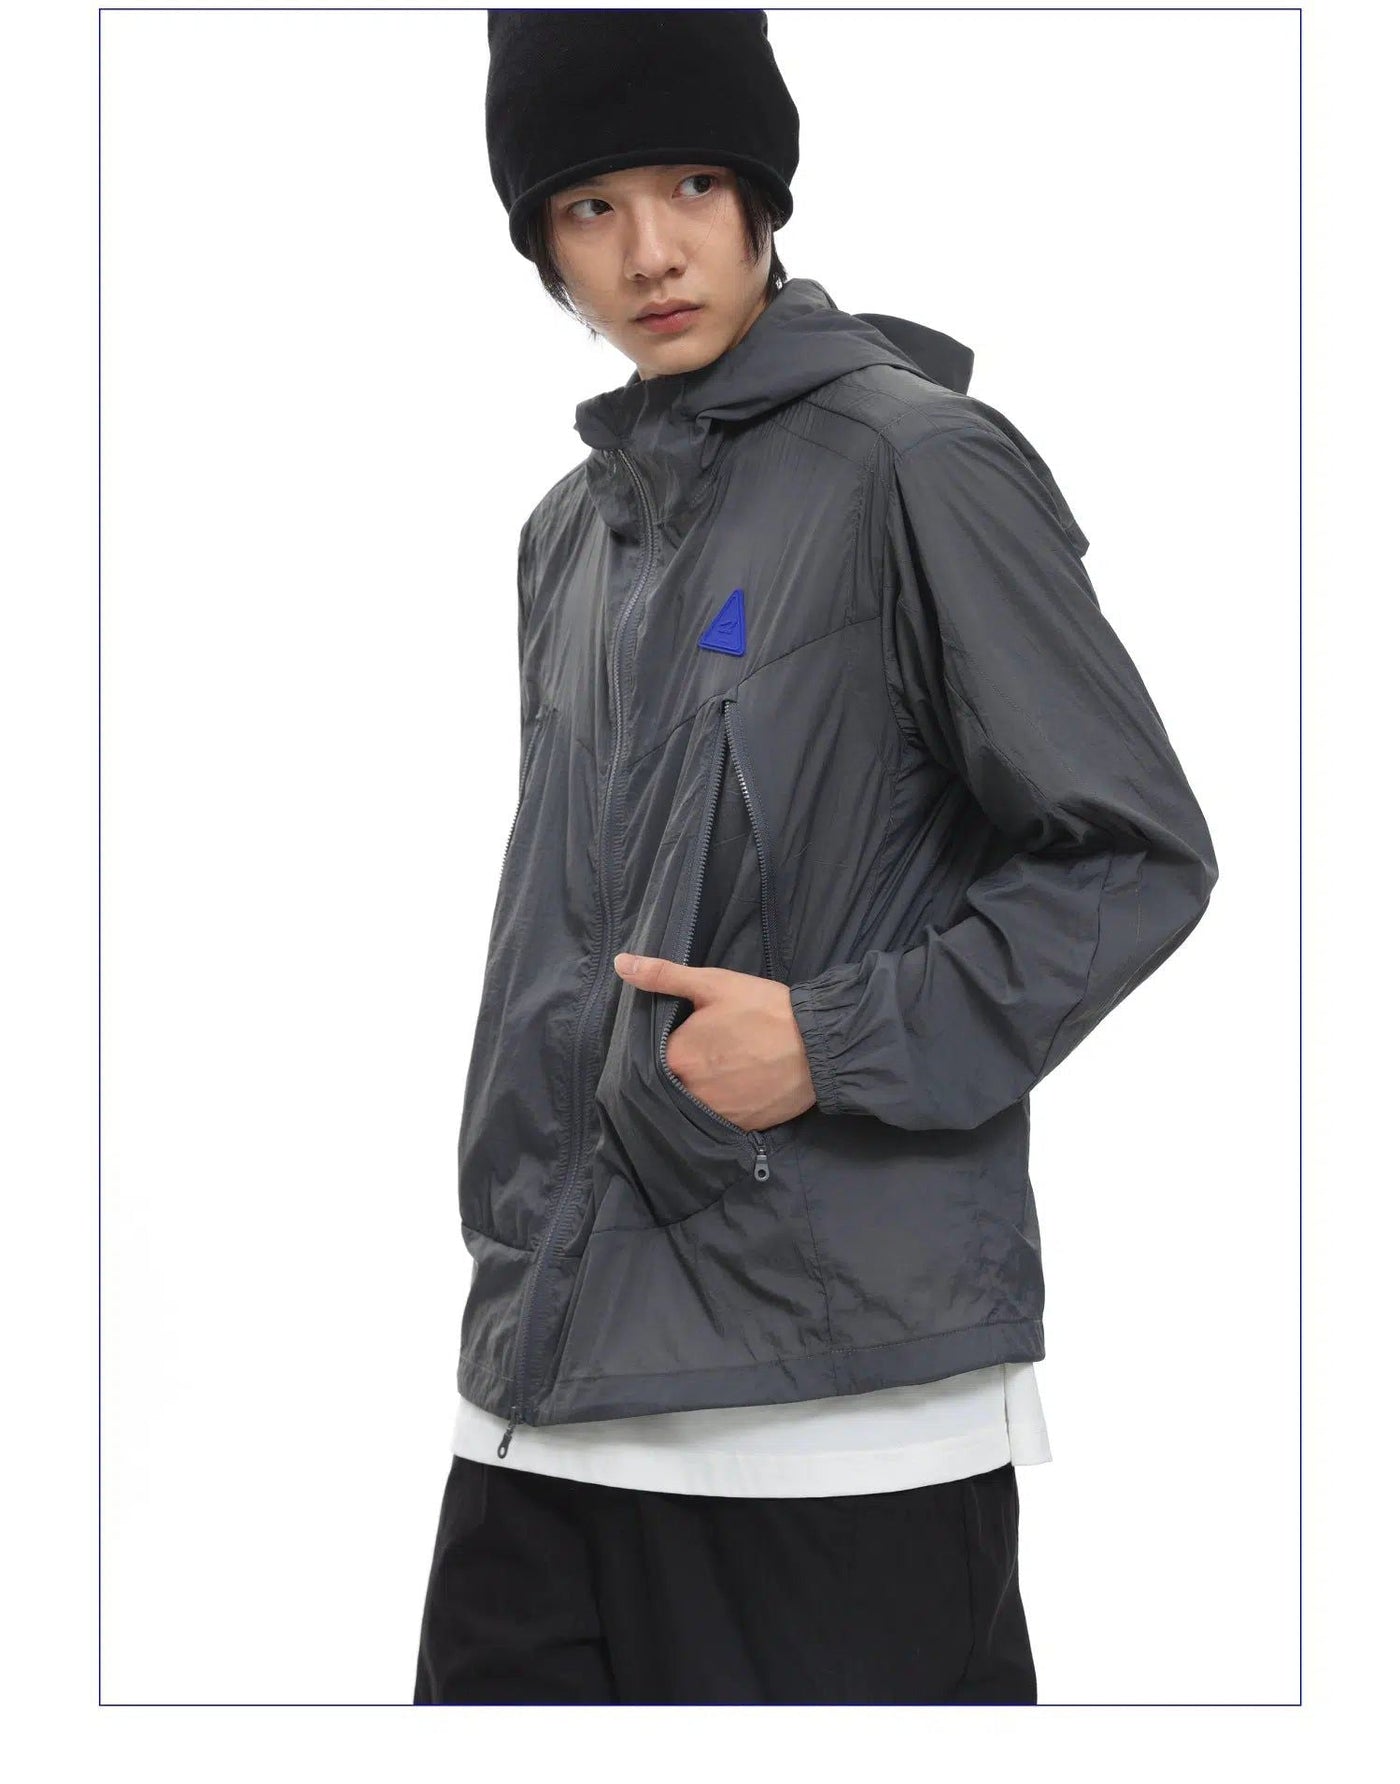 Hooded Sun Protection Jacket Korean Street Fashion Jacket By Roaring Wild Shop Online at OH Vault